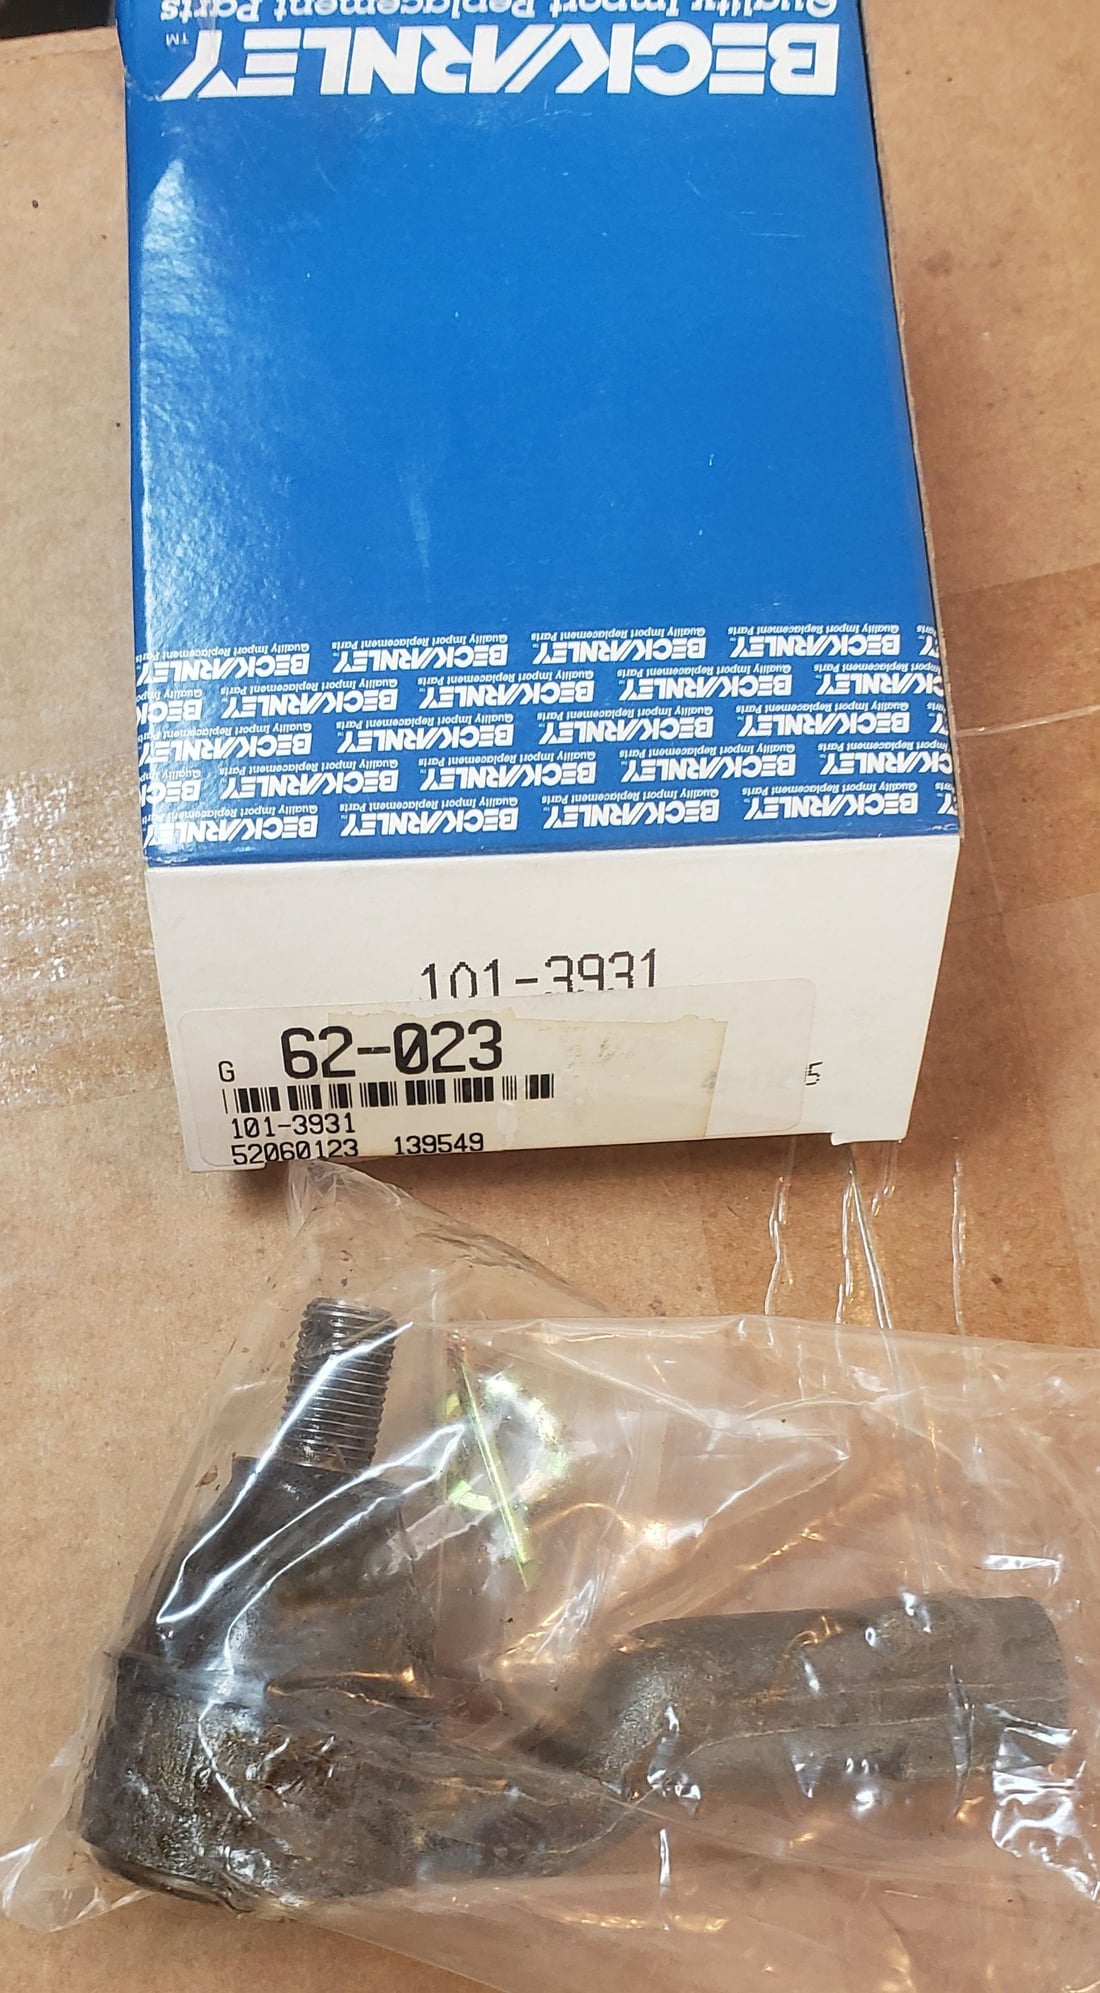 Miscellaneous - Multiple New parts for 1987 RX7 GXL - Garnish, Weather Strips, Bearing, Other - New - 1987 to 1991 Mazda RX-7 - Richardson, TX 75082, United States